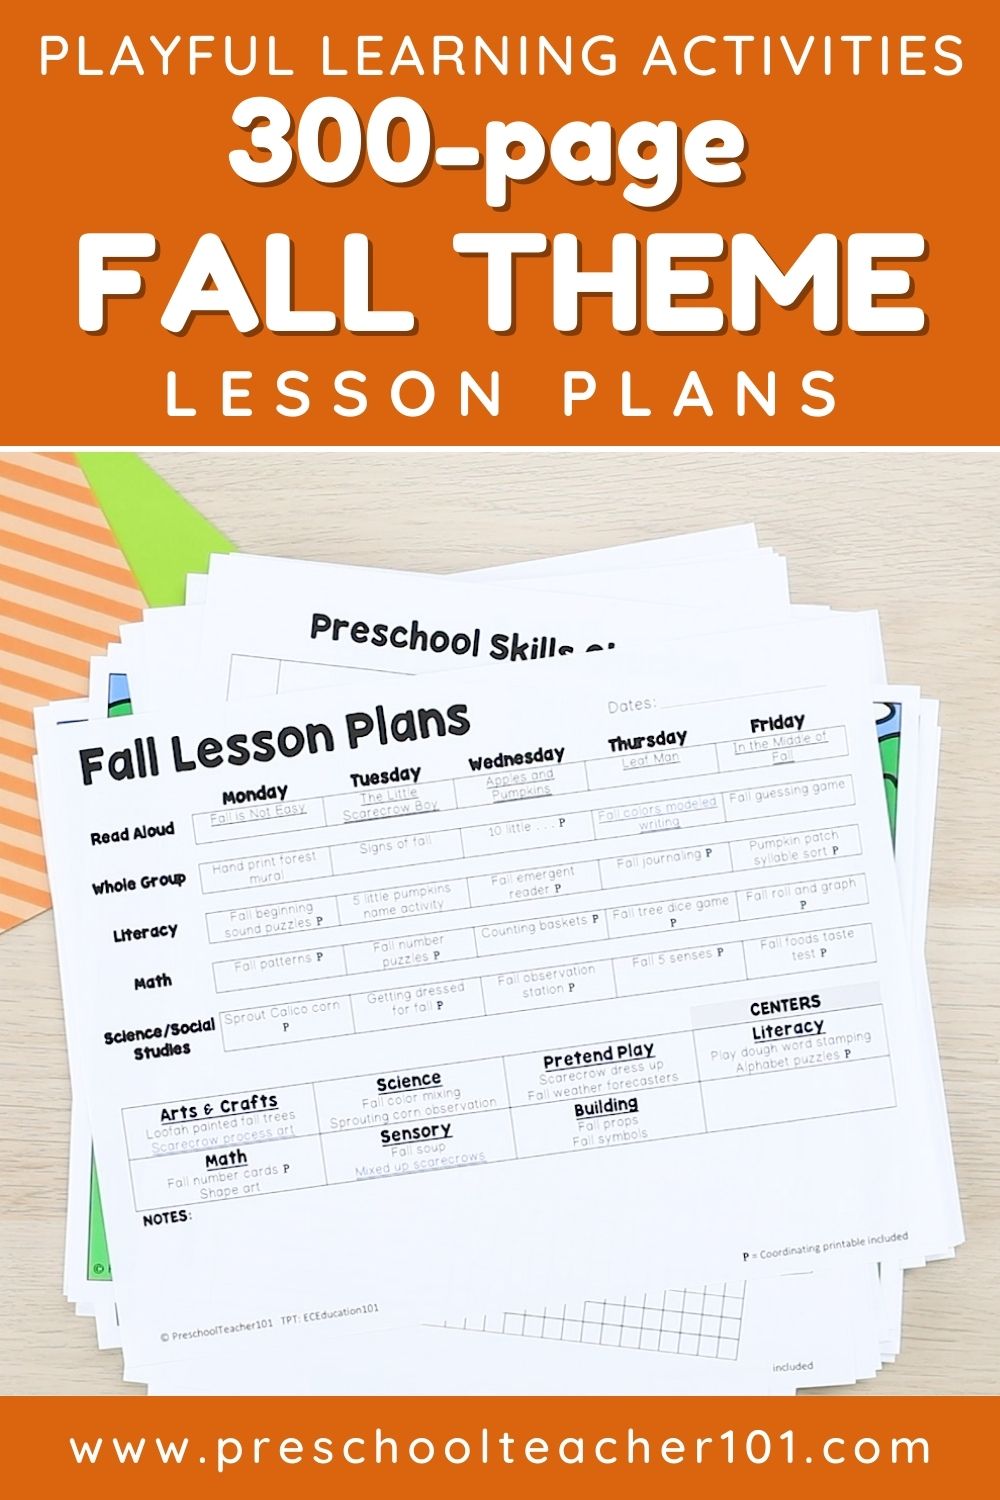 Playful Learning Activities - Fall Theme LP